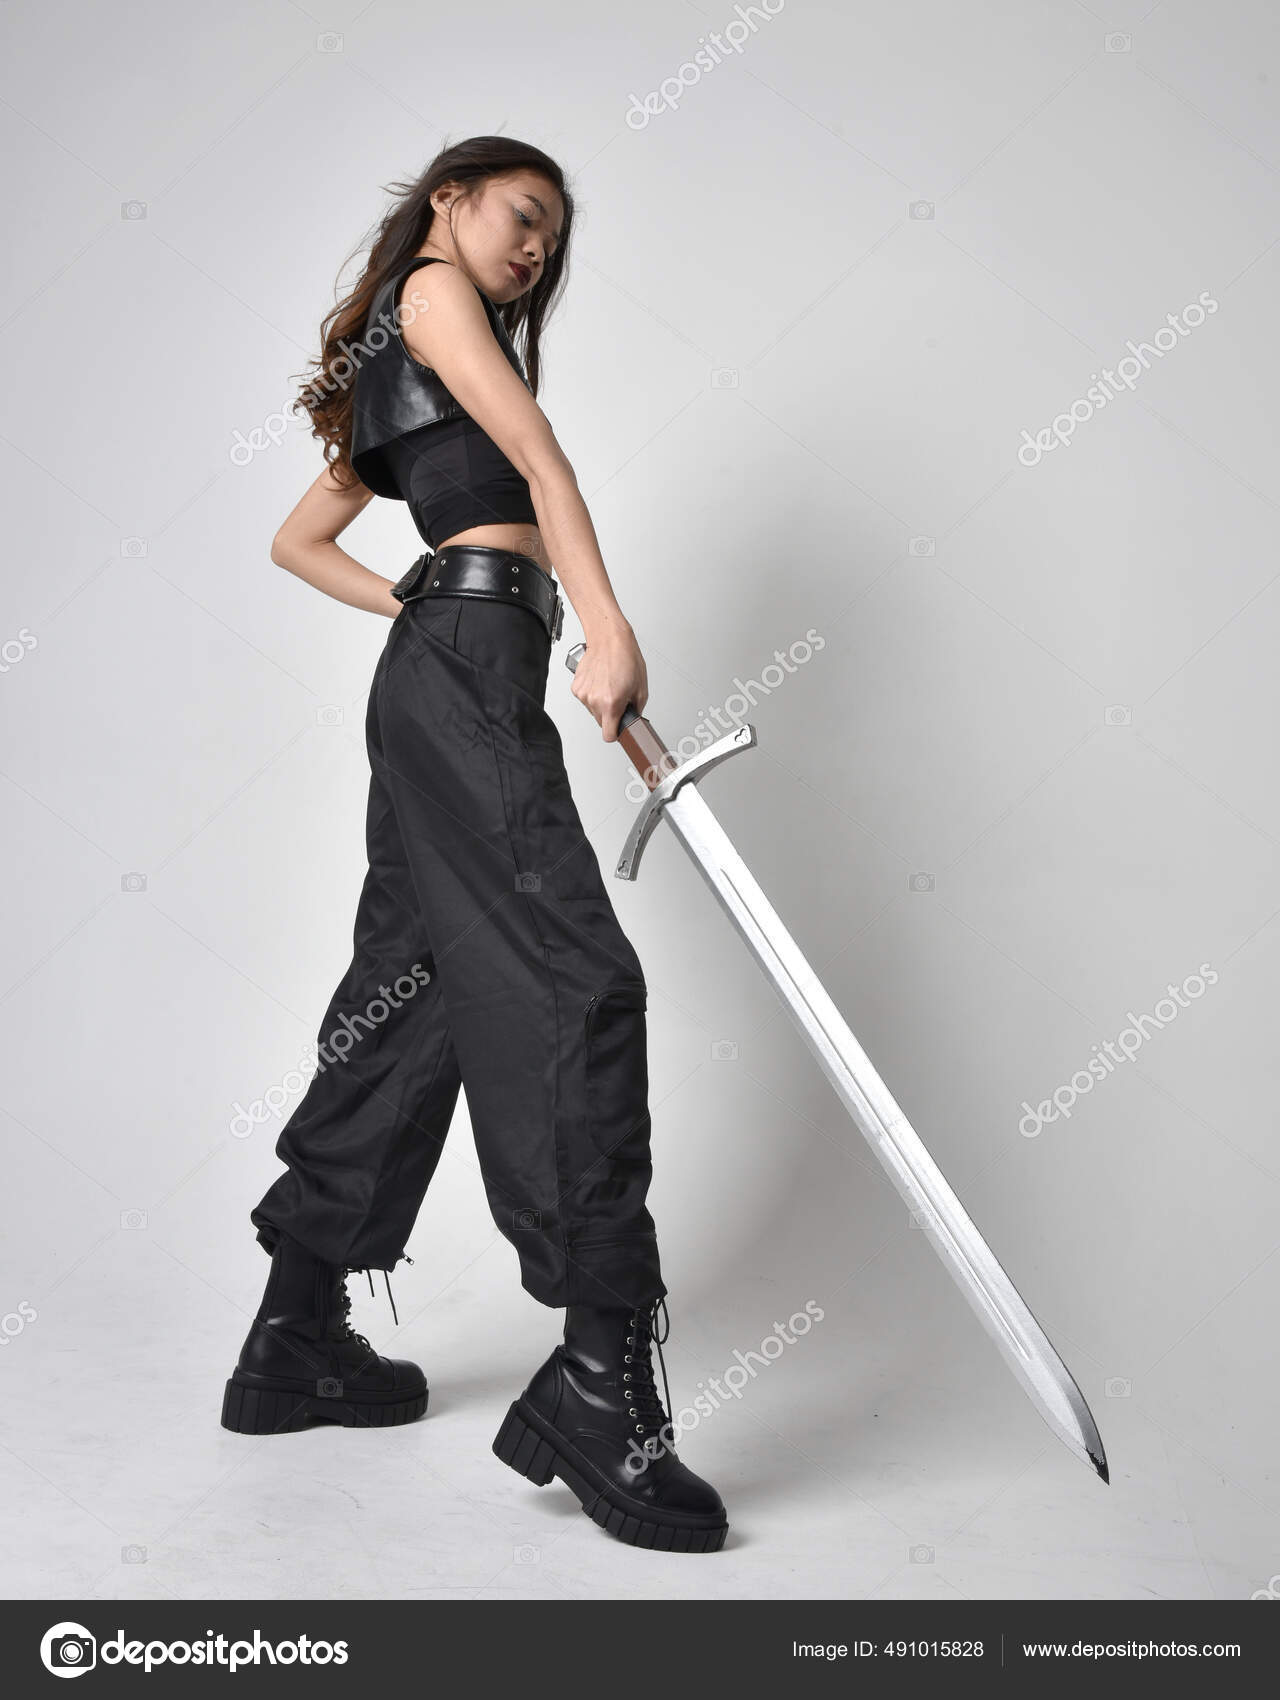 Woman posing with sword stock image. Image of martial - 41302725